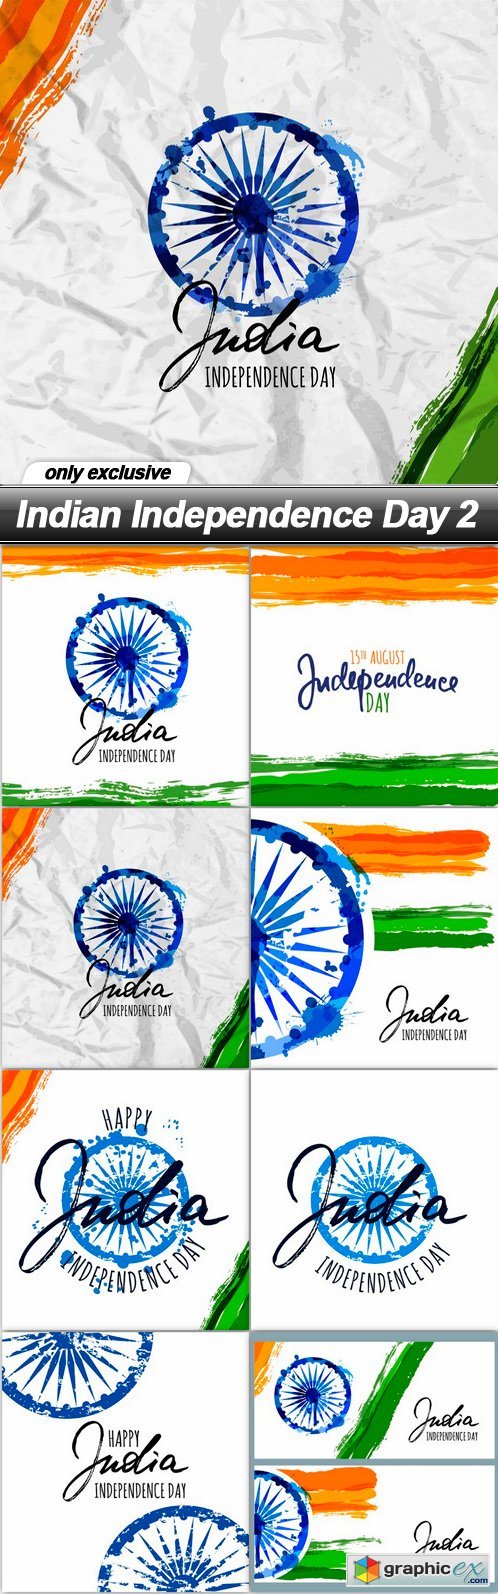 Indian Independence Day 2 - 8 EPS